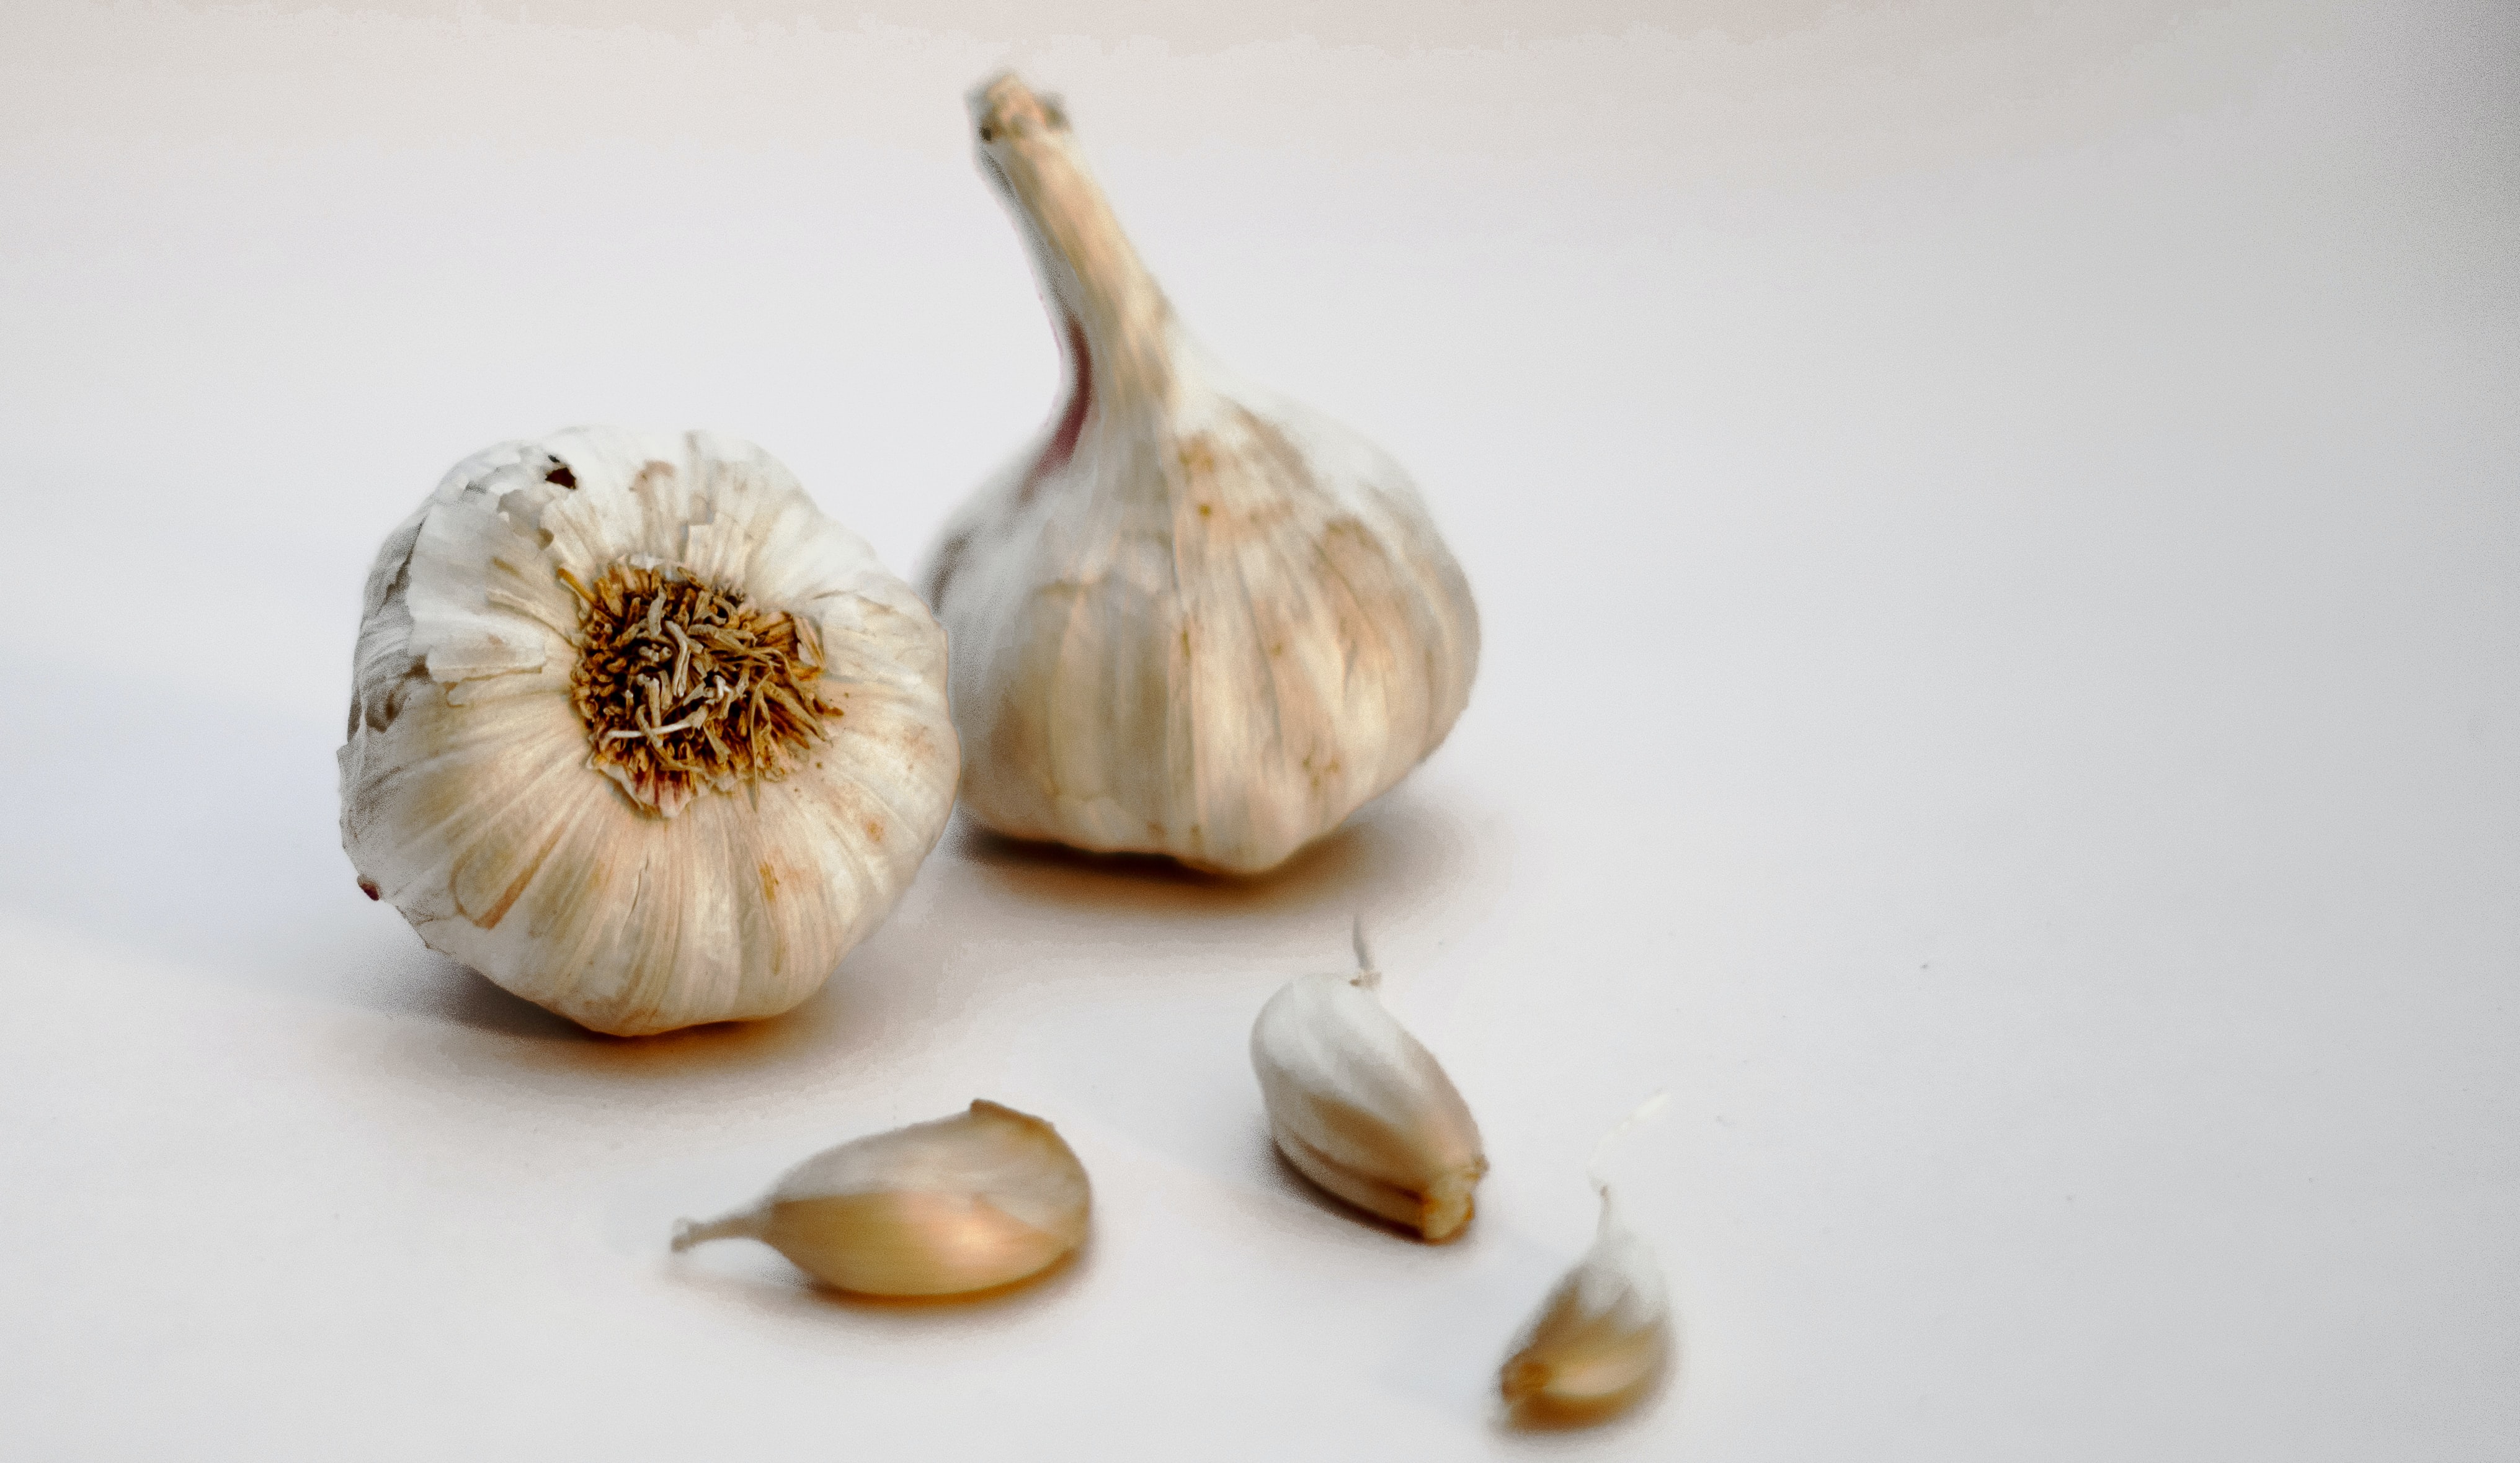 Weekly Tip - Benefits of Raw Garlic in the diet